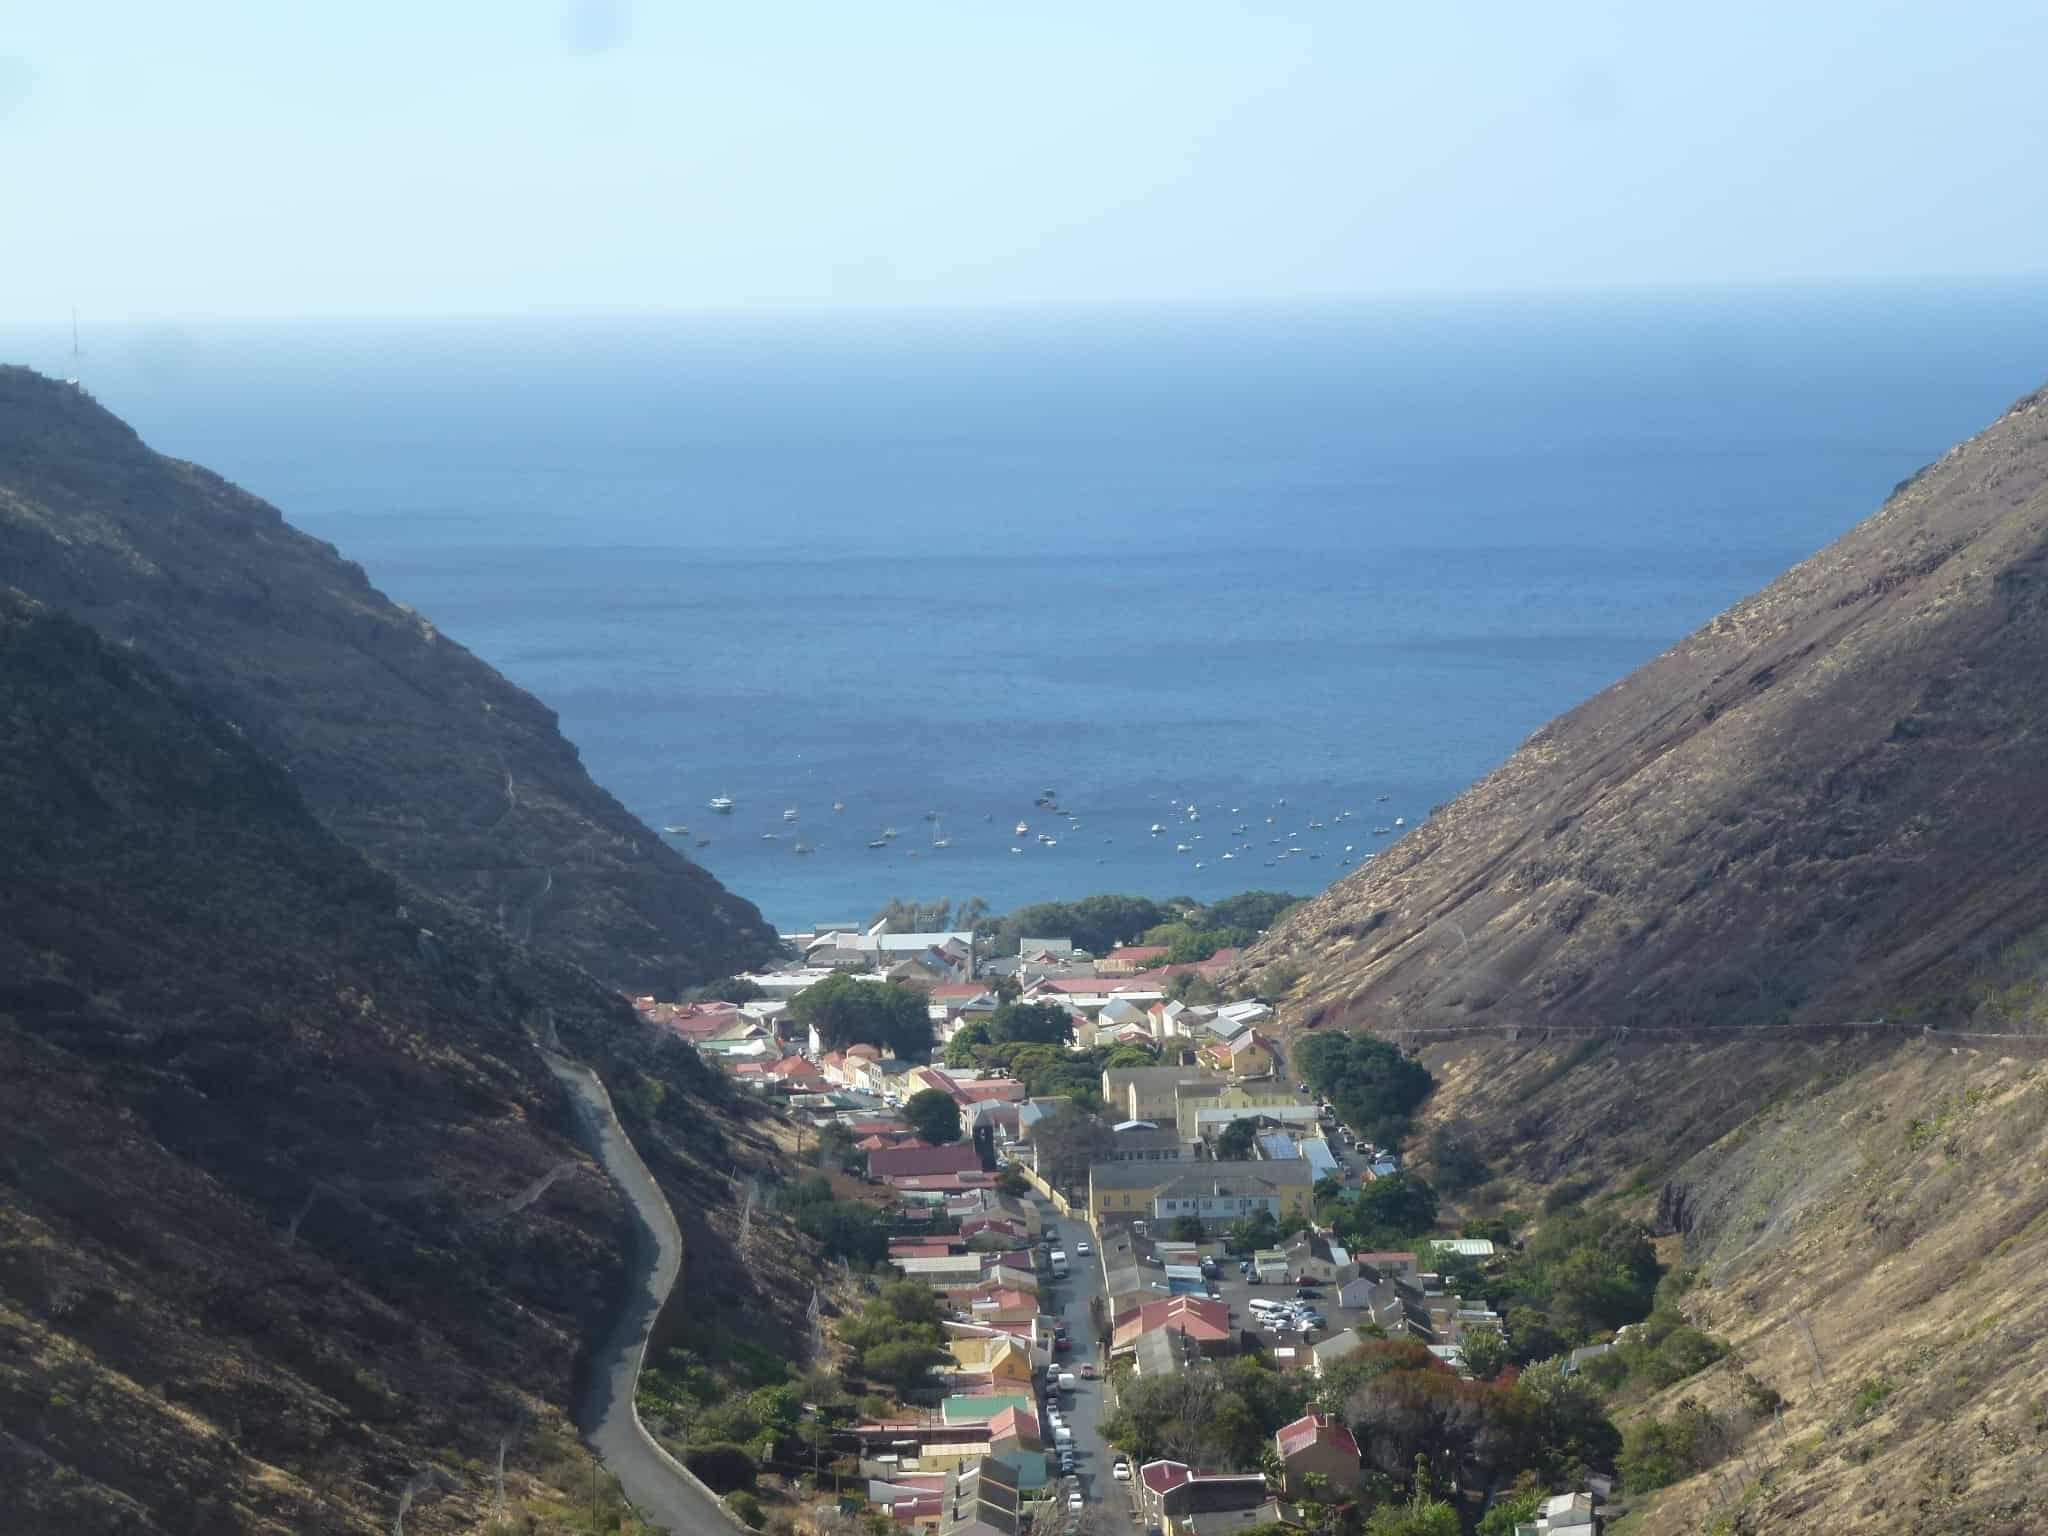 Jamestown, capital of St Helena, an extraordinary island with a rich history and remarkable wildlife, because of this, it was entered onto the UK's tentative list of World Heritage Sites; Copyright: Felix Driver